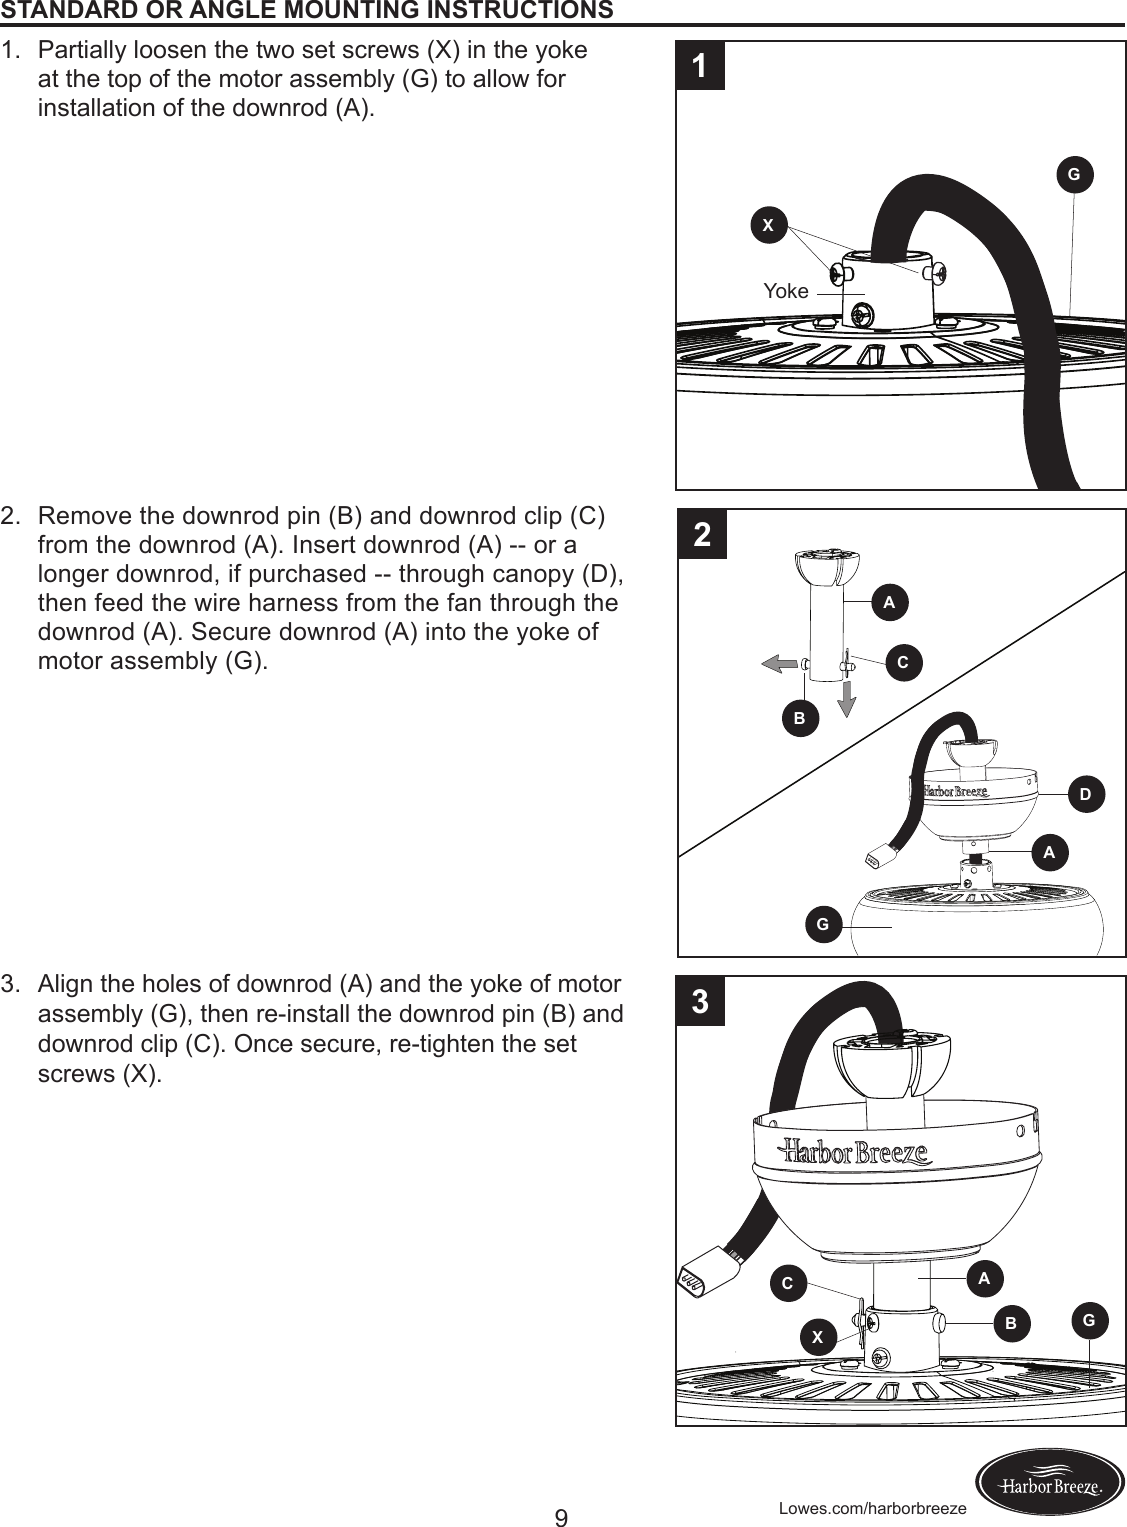 9Lowes.com/harborbreezeSTANDARD OR ANGLE MOUNTING INSTRUCTIONS1.  Partially loosen the two set screws (X) in the yoke at the top of the motor assembly (G) to allow for installation of the downrod (A). 2.  Remove the downrod pin (B) and downrod clip (C) from the downrod (A). Insert downrod (A) -- or a longer downrod, if purchased -- through canopy (D), then feed the wire harness from the fan through the downrod (A). Secure downrod (A) into the yoke of motor assembly (G). 3.  Align the holes of downrod (A) and the yoke of motor assembly (G), then re-install the downrod pin (B) and downrod clip (C). Once secure, re-tighten the set screws (X).CBGAAGBAGCXD231XYoke